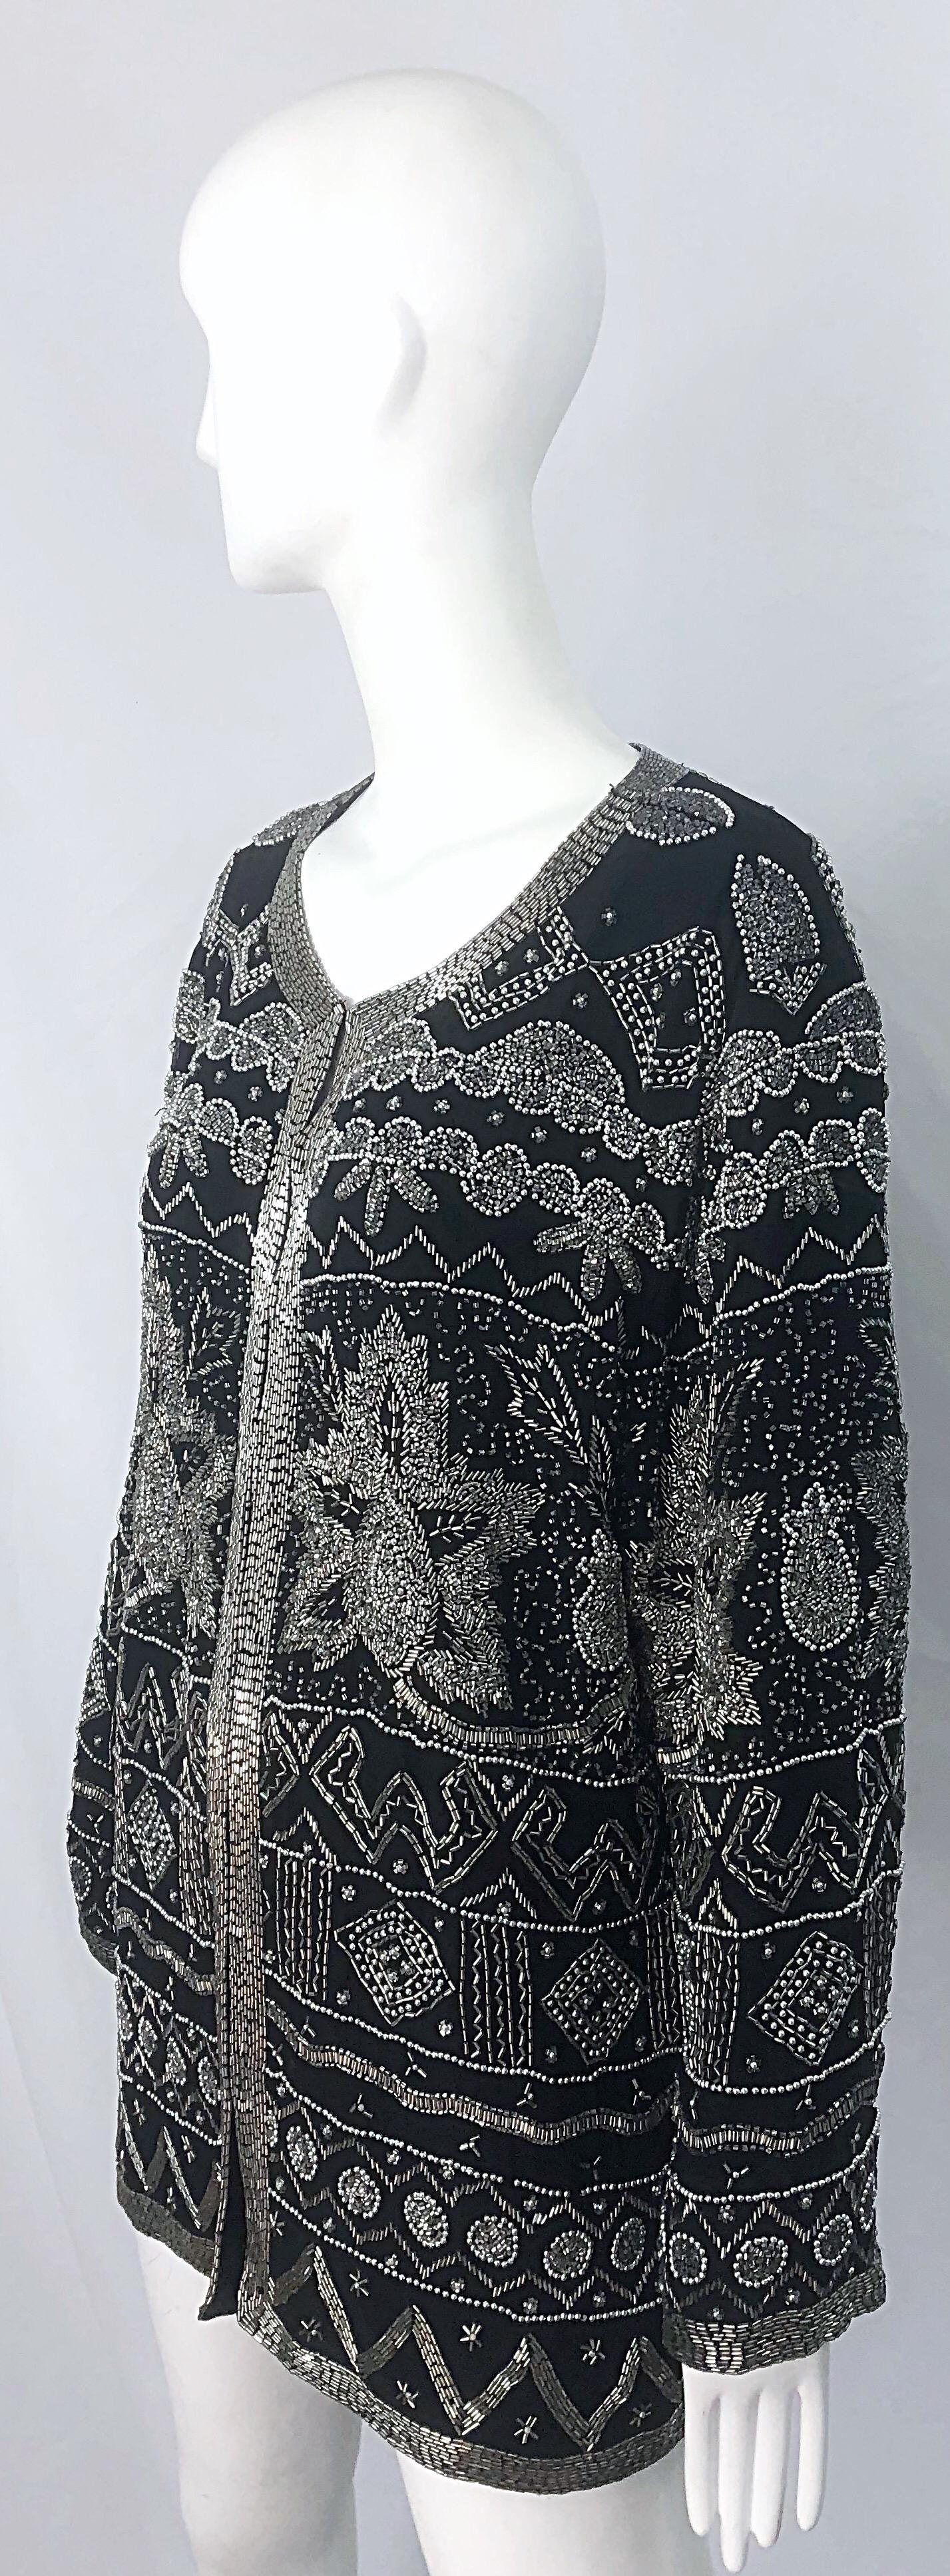 Intricate 1990s Heavily Beaded 3XL Black Silver Sequined Vintage 90s Jacket Top For Sale 10